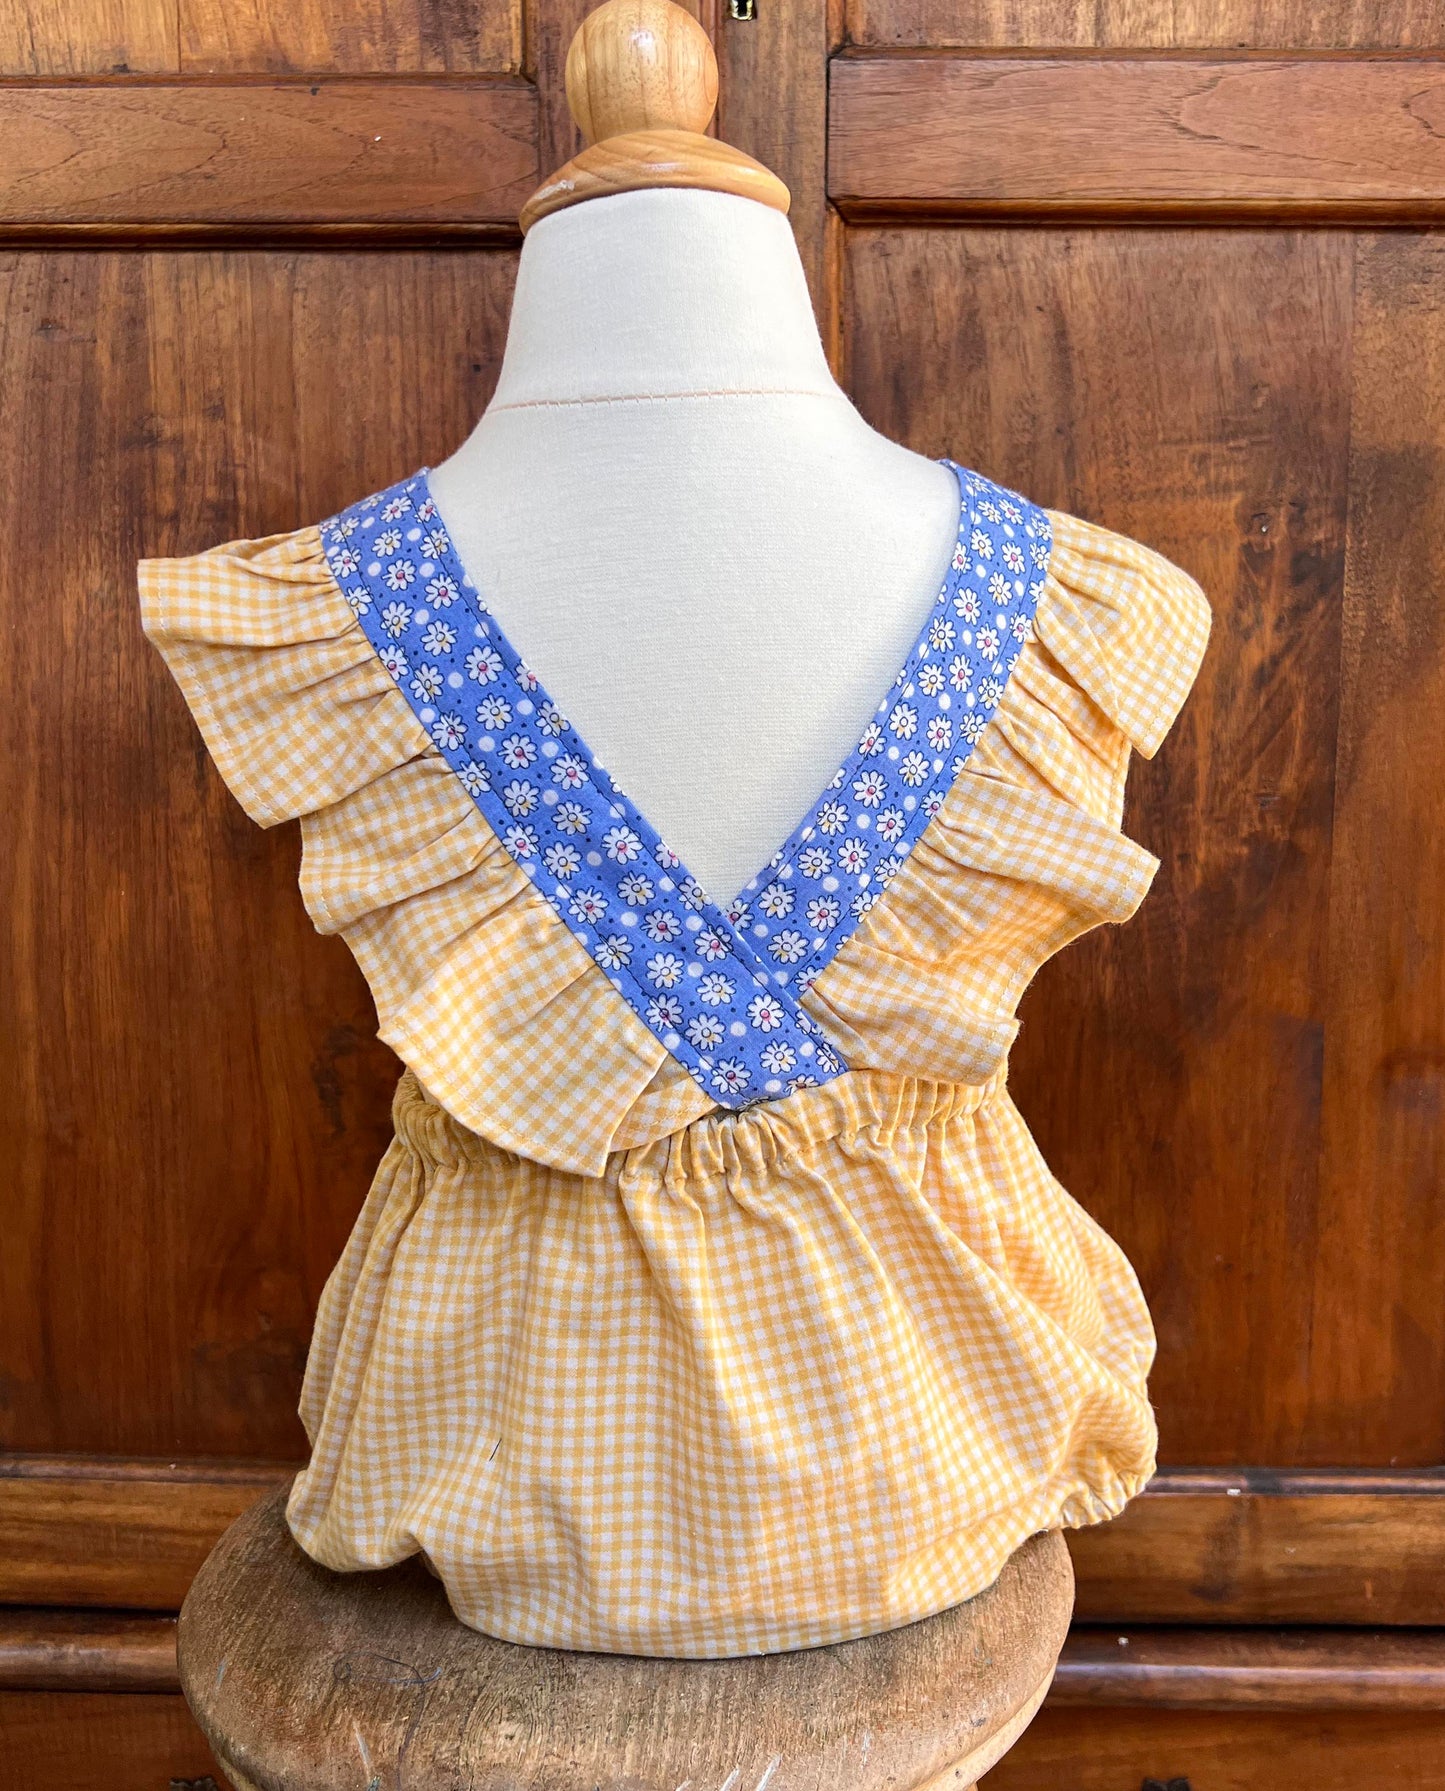 Darling size 2T blue daisy romper with flower button waistband yellow and blue. Ruffled straps. Free Shipping